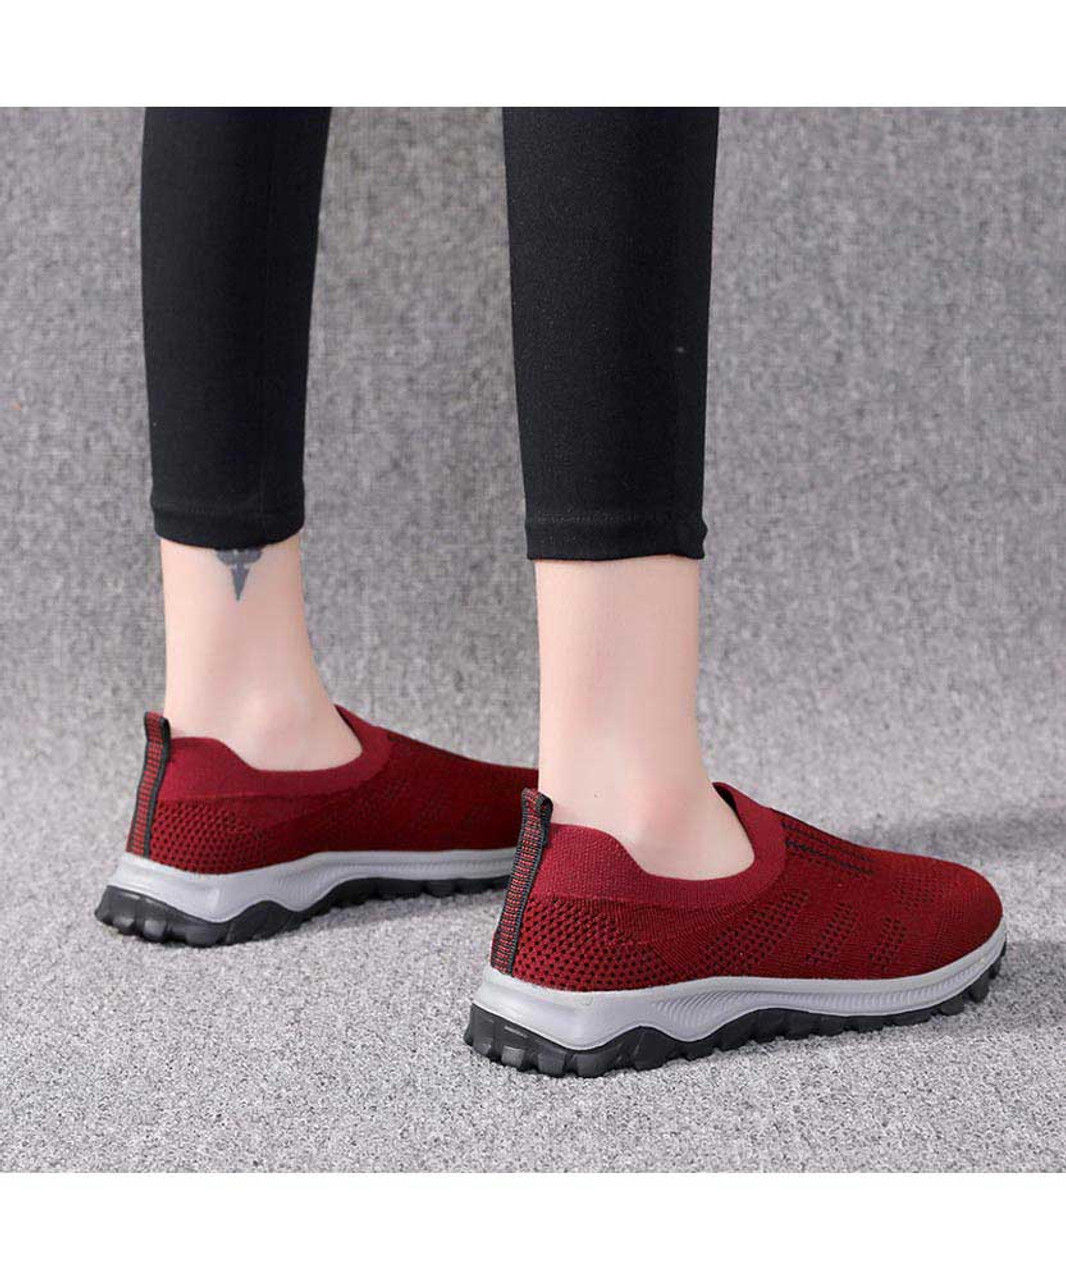 Red stripe texture casual slip on shoe sneaker | Womens sneakers shoes ...